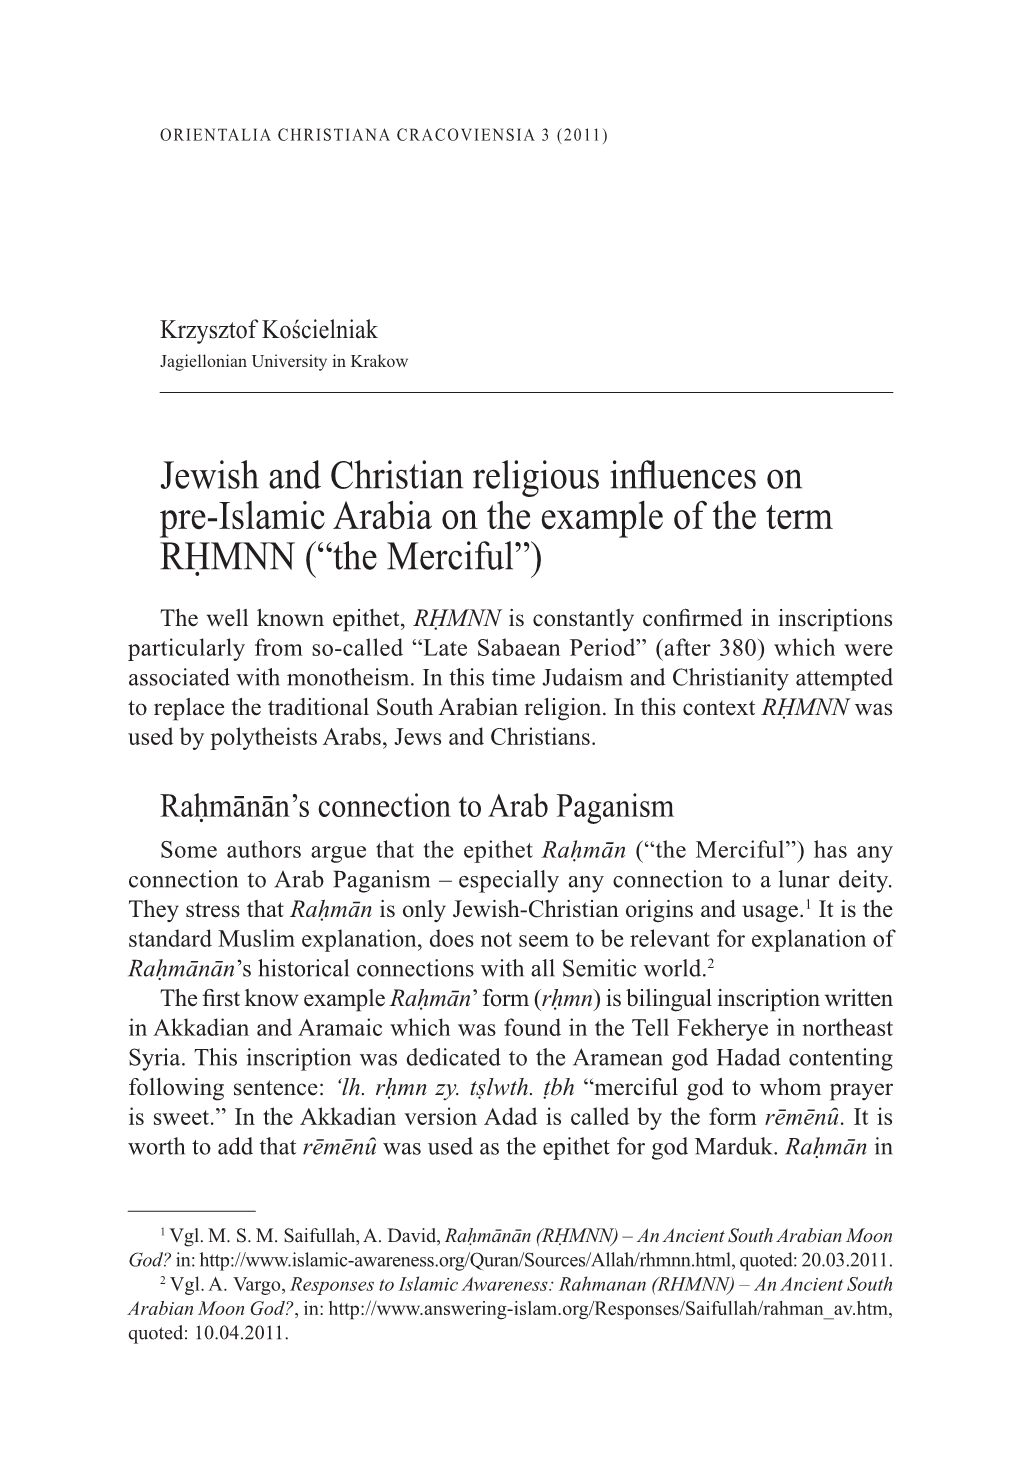 Jewish and Christian Religious Influences on Pre-Islamic Arabia on the Example of the Term RḤMNN (“The Merciful”)